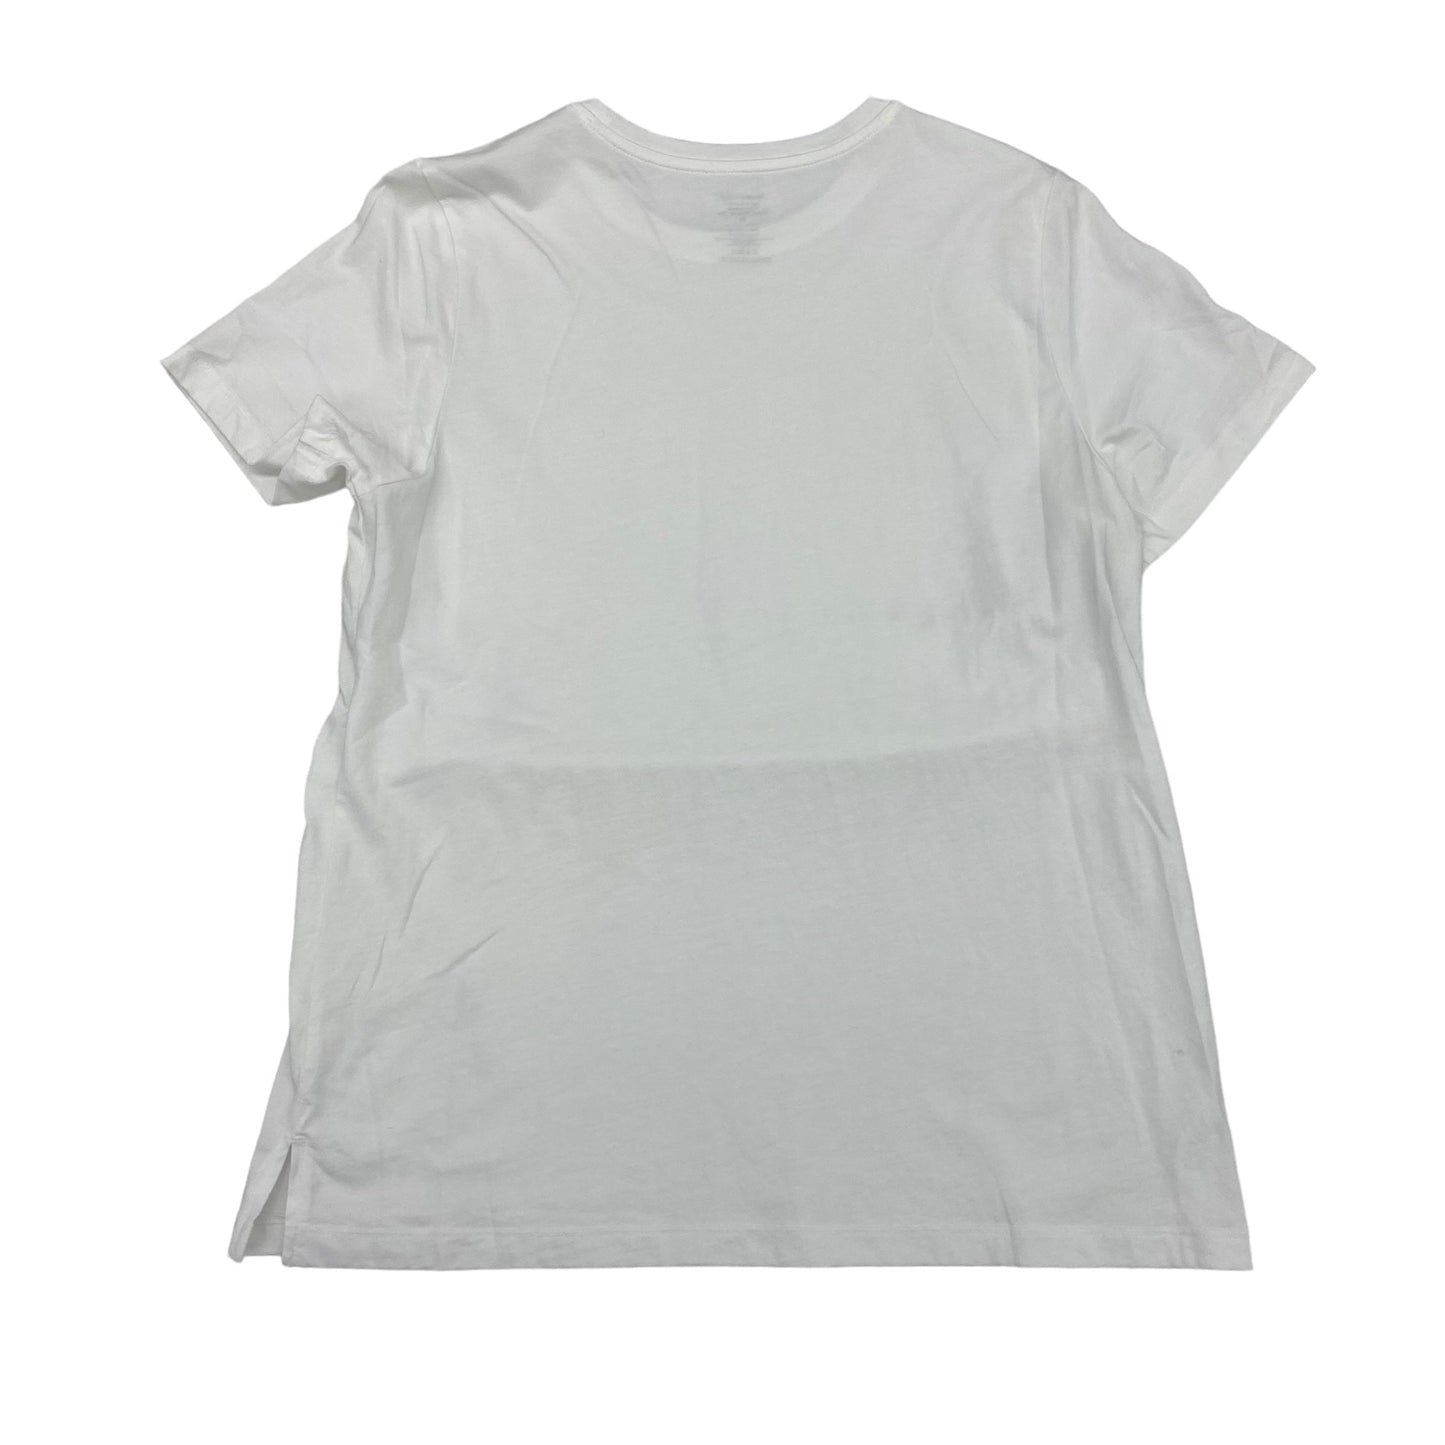 WHITE TOP SS by MEMBERS MARK Size:M